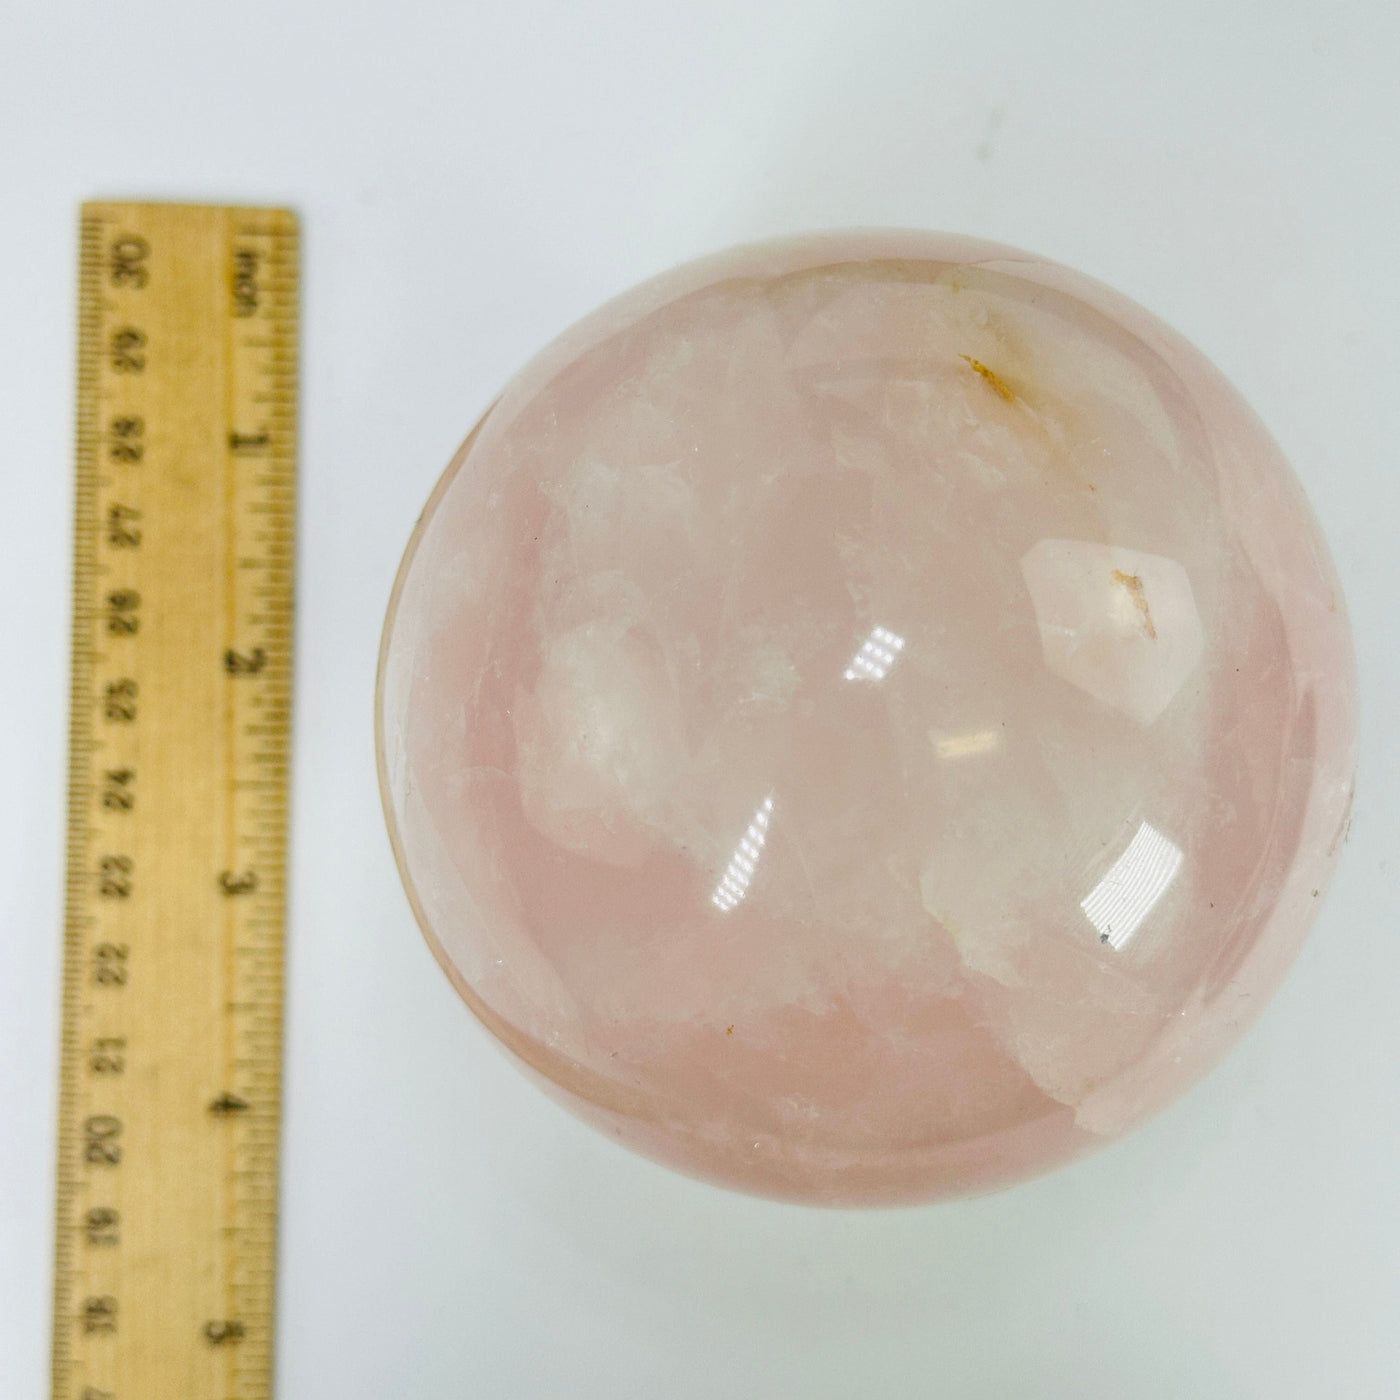 rose quartz sphere next to a ruler for size reference